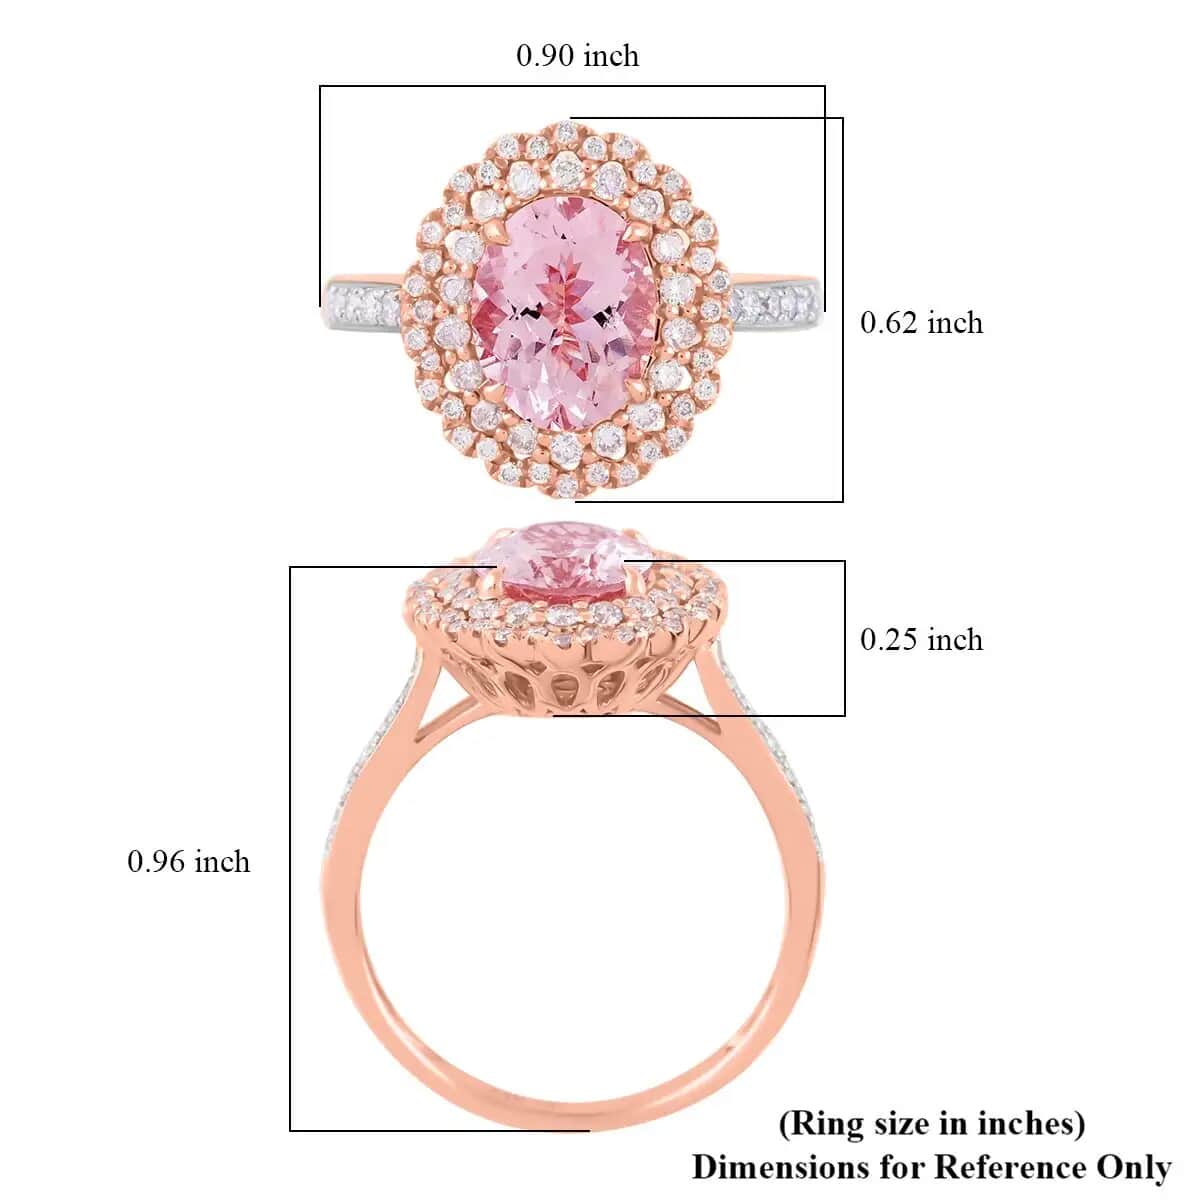 Ankur Treasure Chest Modani Marropino Morganite Ring, 14K Rose Gold Ring, Diamond Floral Halo Ring, Natural Pink And White Diamond Accent Ring 1.95 ctw (Size 8.0) image number 6